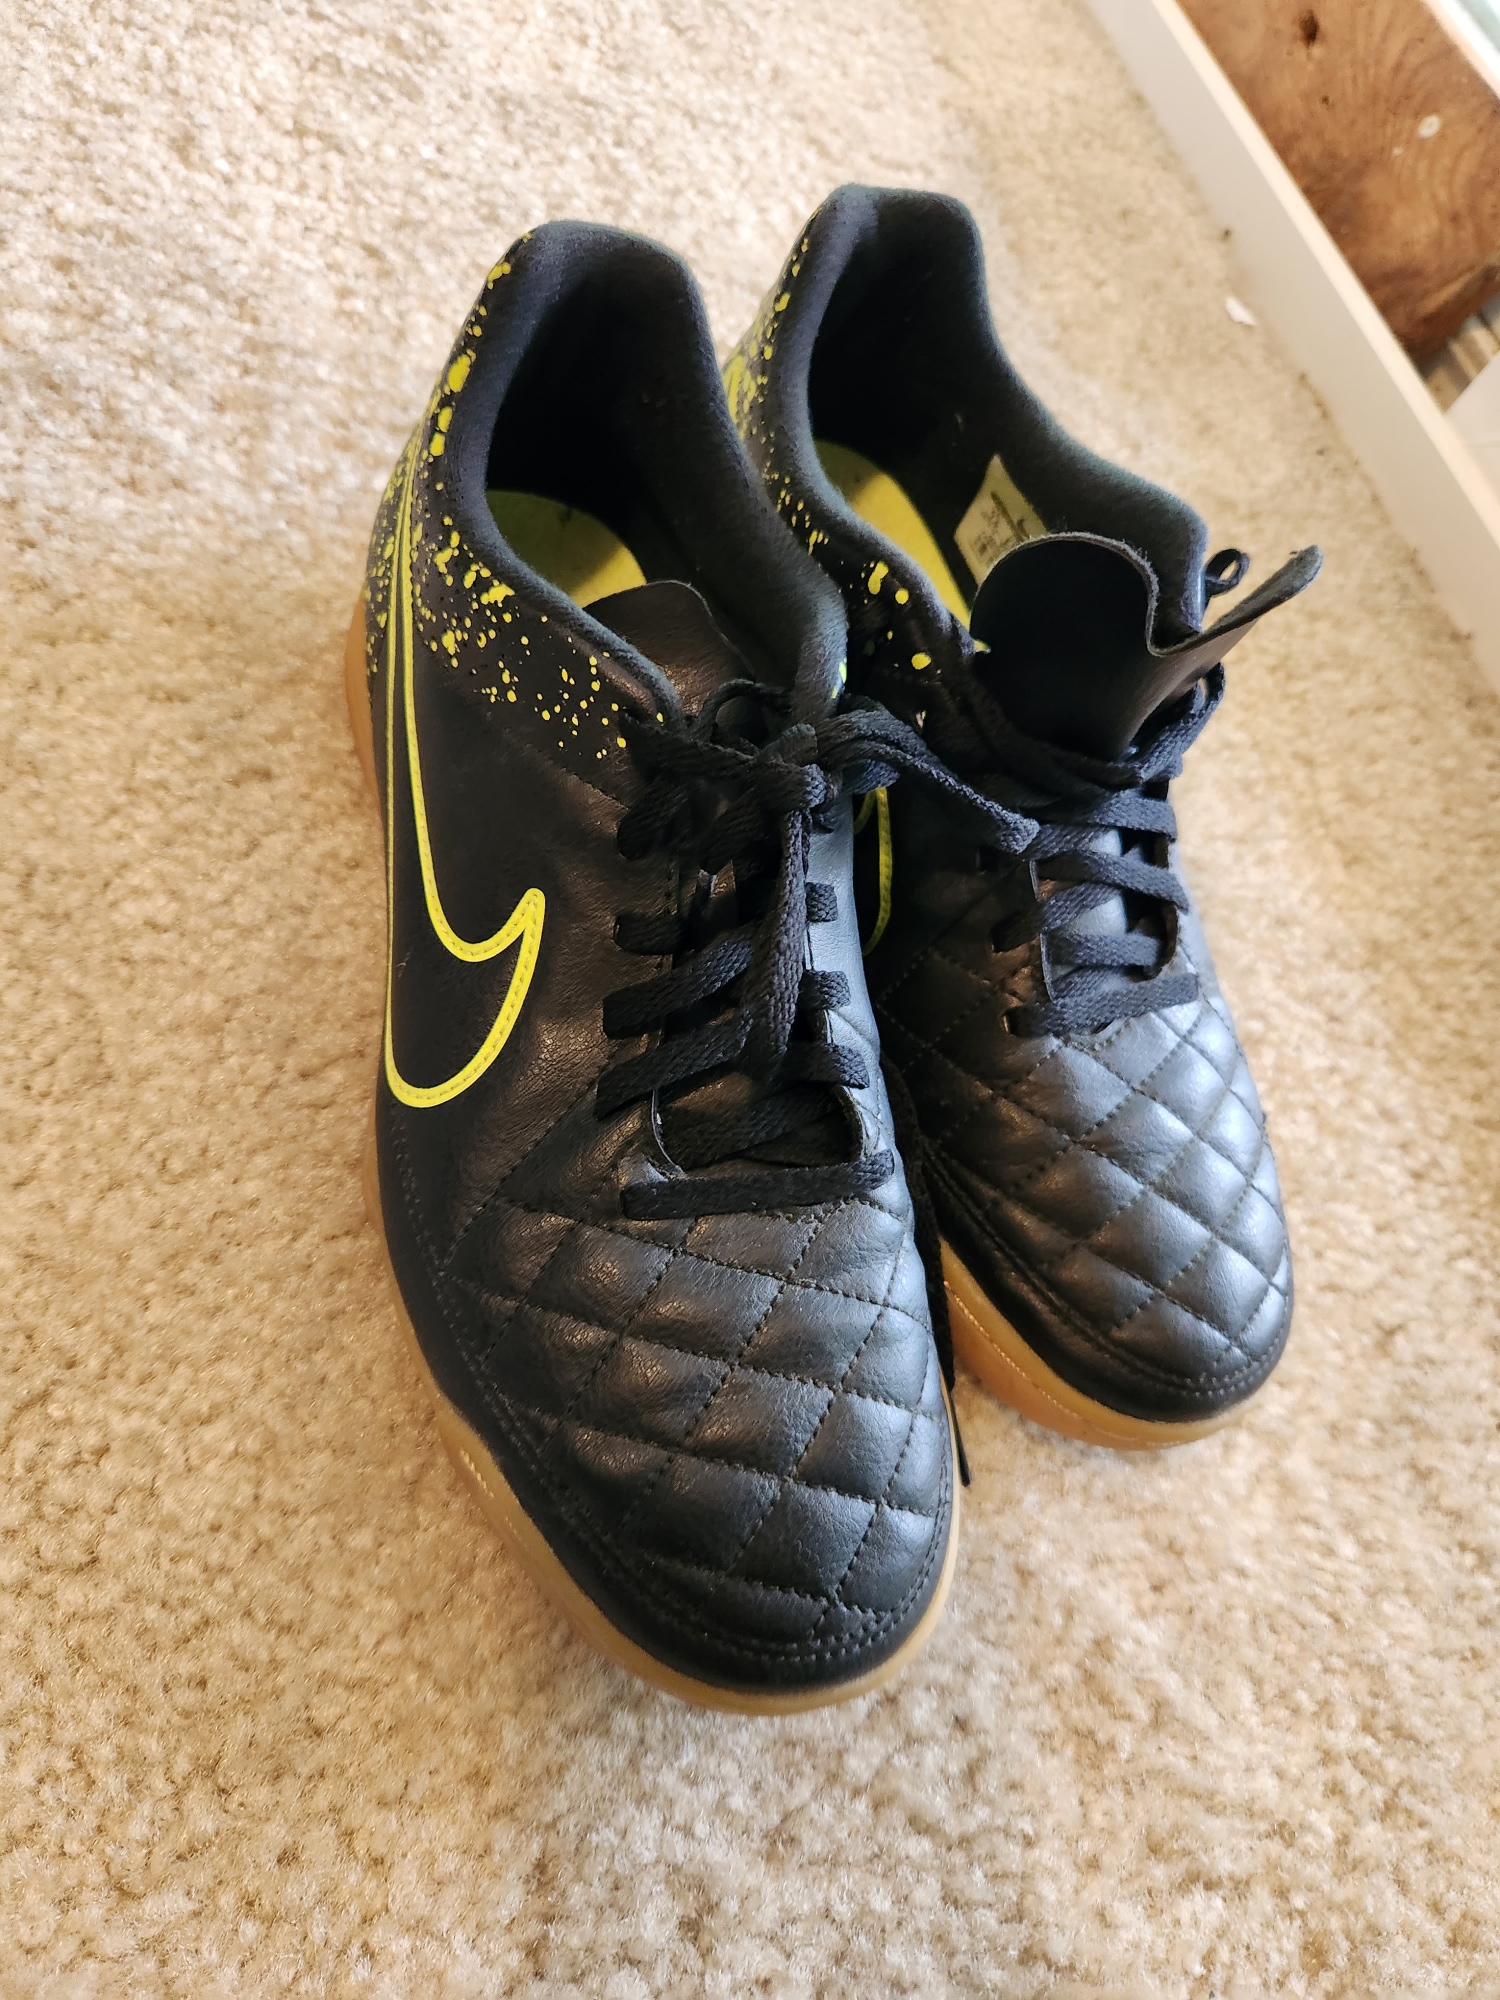 Black Used Size 7.5 (Women's 8.5) Indoor Nike Cleats